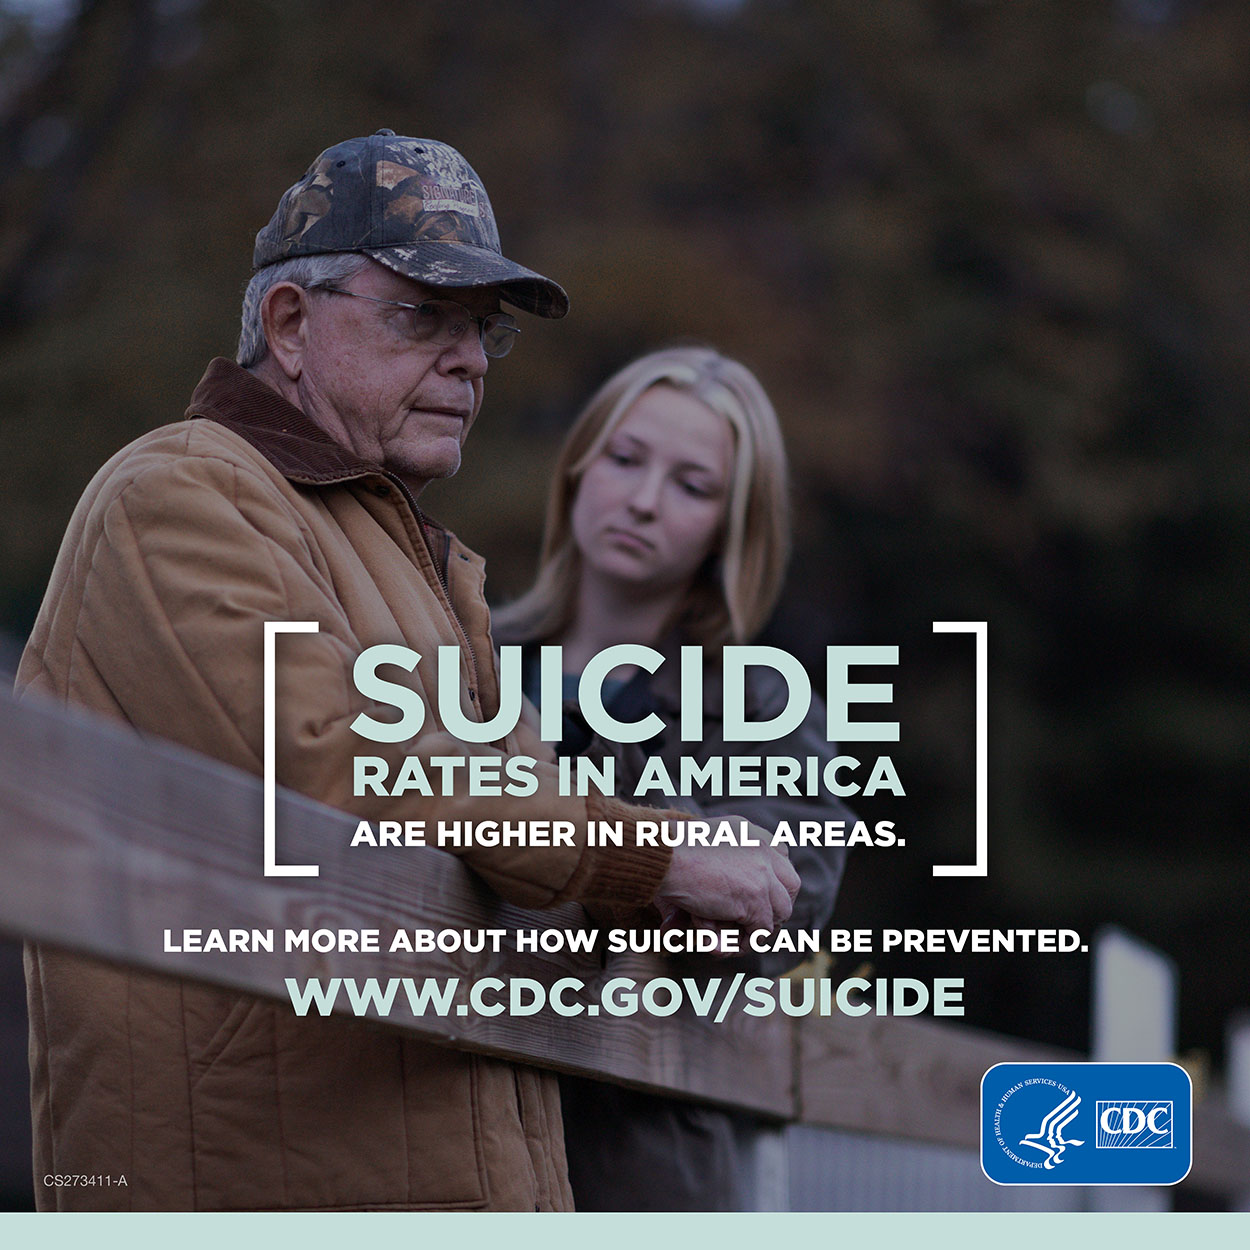 A banner on suicide provided by the CDC.